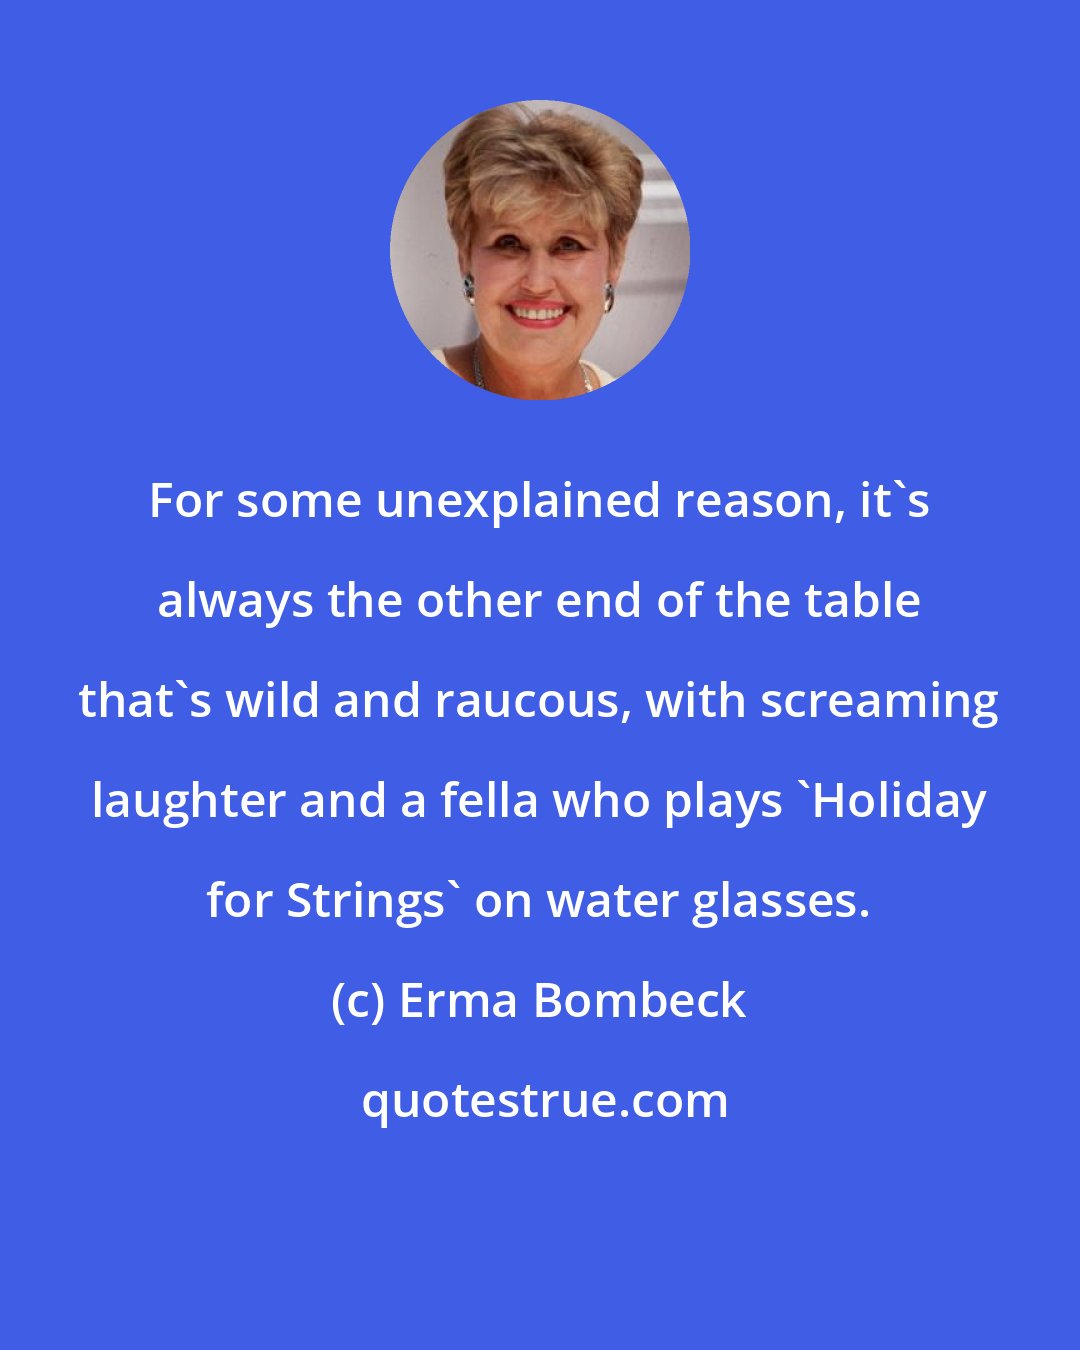 Erma Bombeck: For some unexplained reason, it's always the other end of the table that's wild and raucous, with screaming laughter and a fella who plays 'Holiday for Strings' on water glasses.